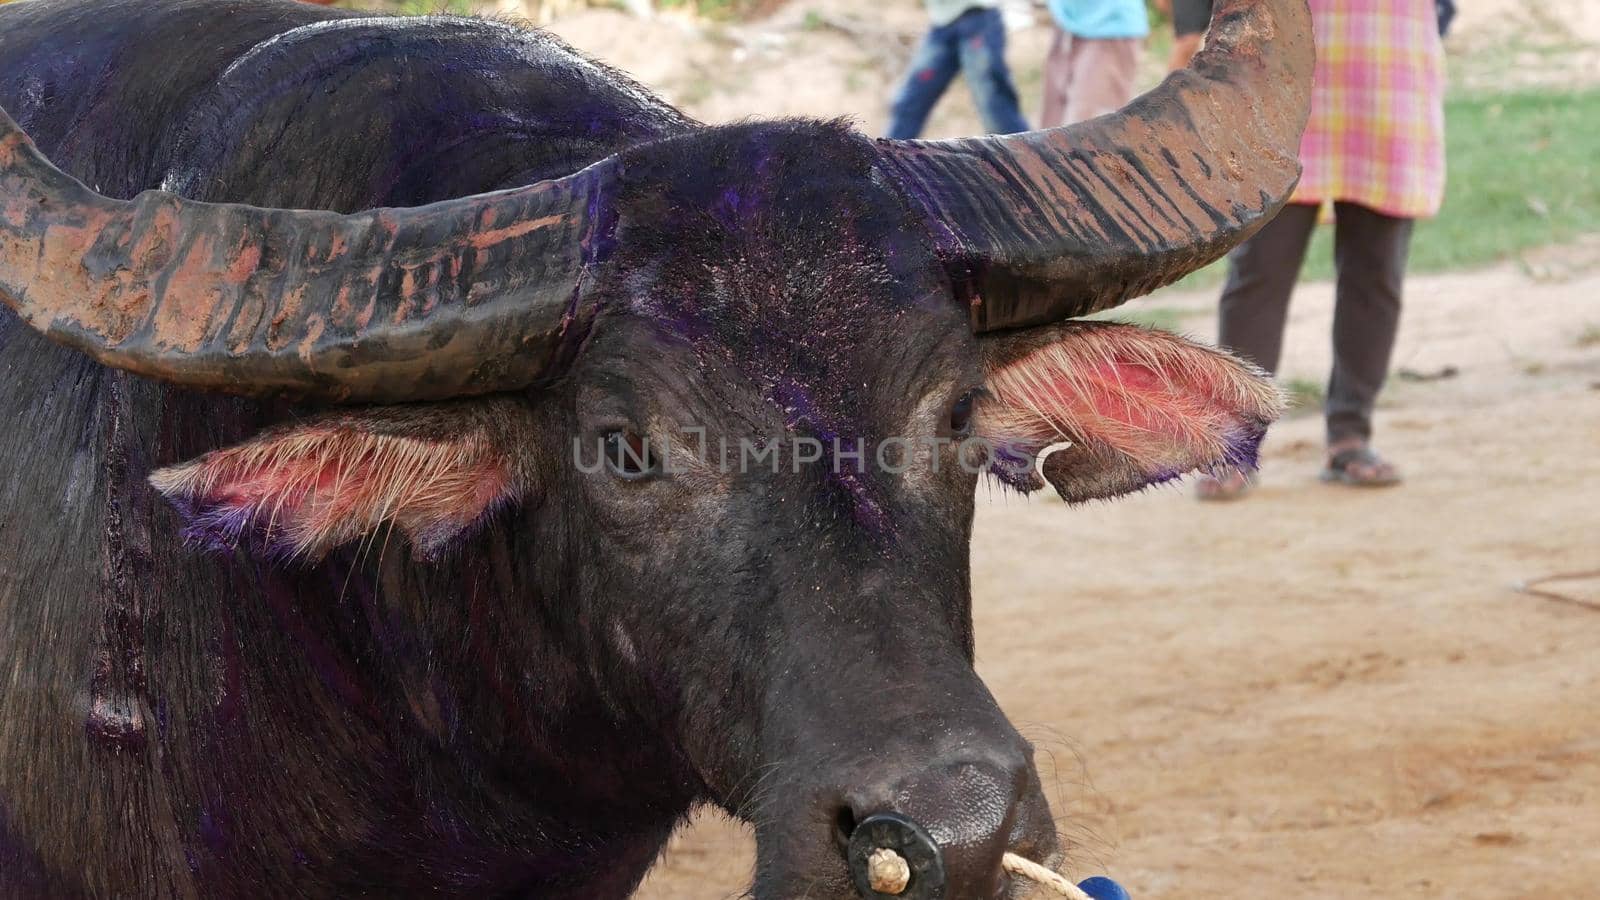 KOH SAMUI, THAILAND - 24 MAY 2019 Rural thai people gather during festival and arrange the traditional battles of their angry water buffaloes on makeshift public arena and betting on these bull fight by DogoraSun